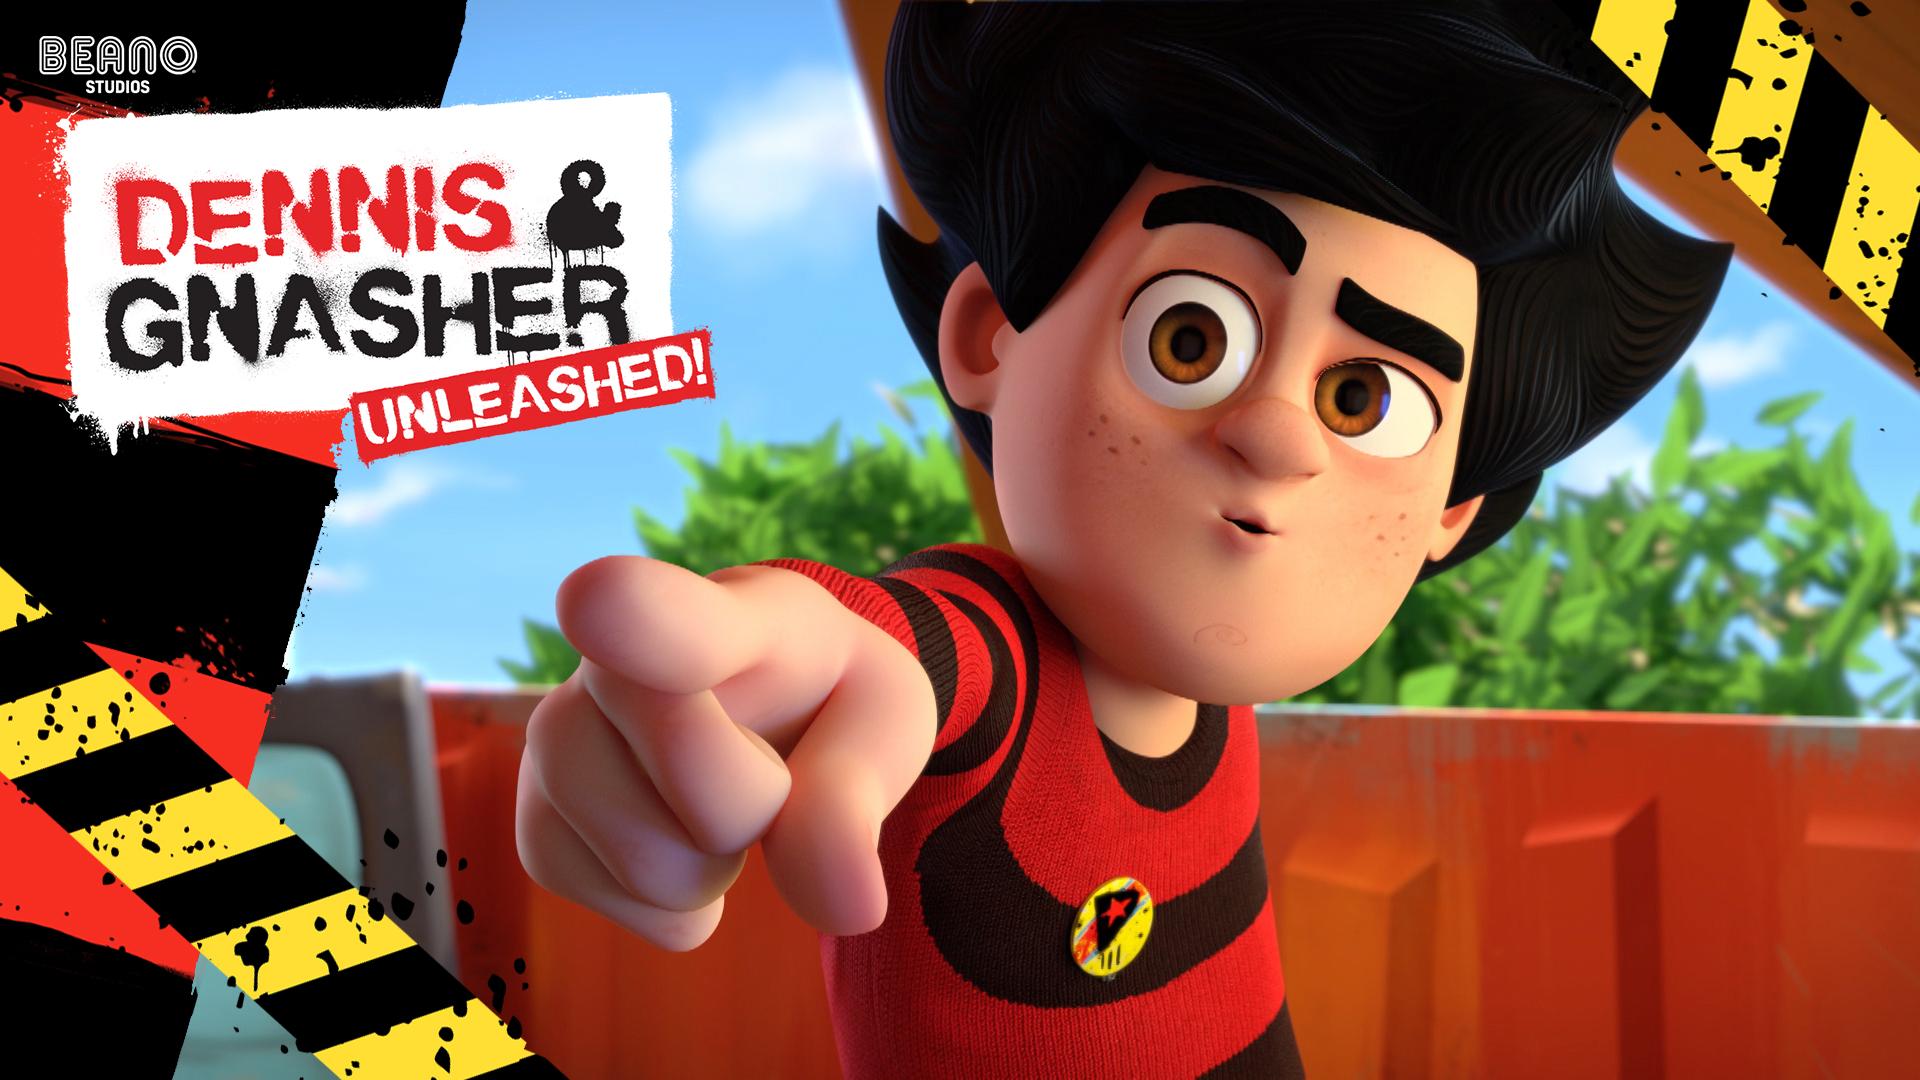 Dennis & Gnasher Unleashed! Series 2 - Episode 13: The Comedy Crown